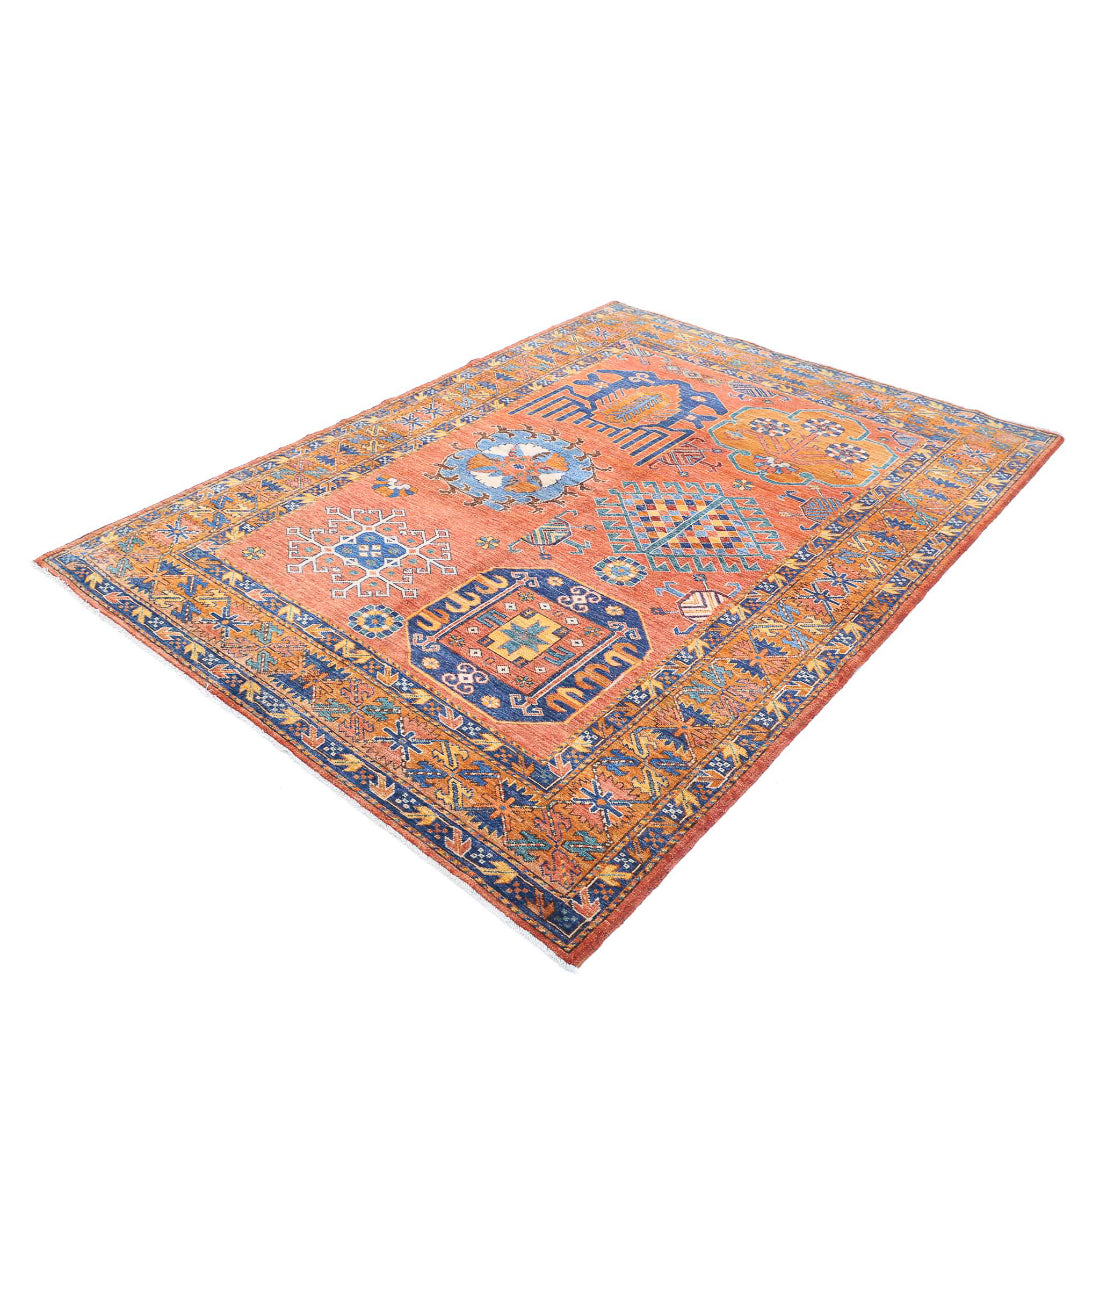 Hand Knotted Nomadic Caucasian Humna Wool Rug - 5'10'' x 8'3'' 5'10'' x 8'3'' (175 X 248) / Red / Taupe